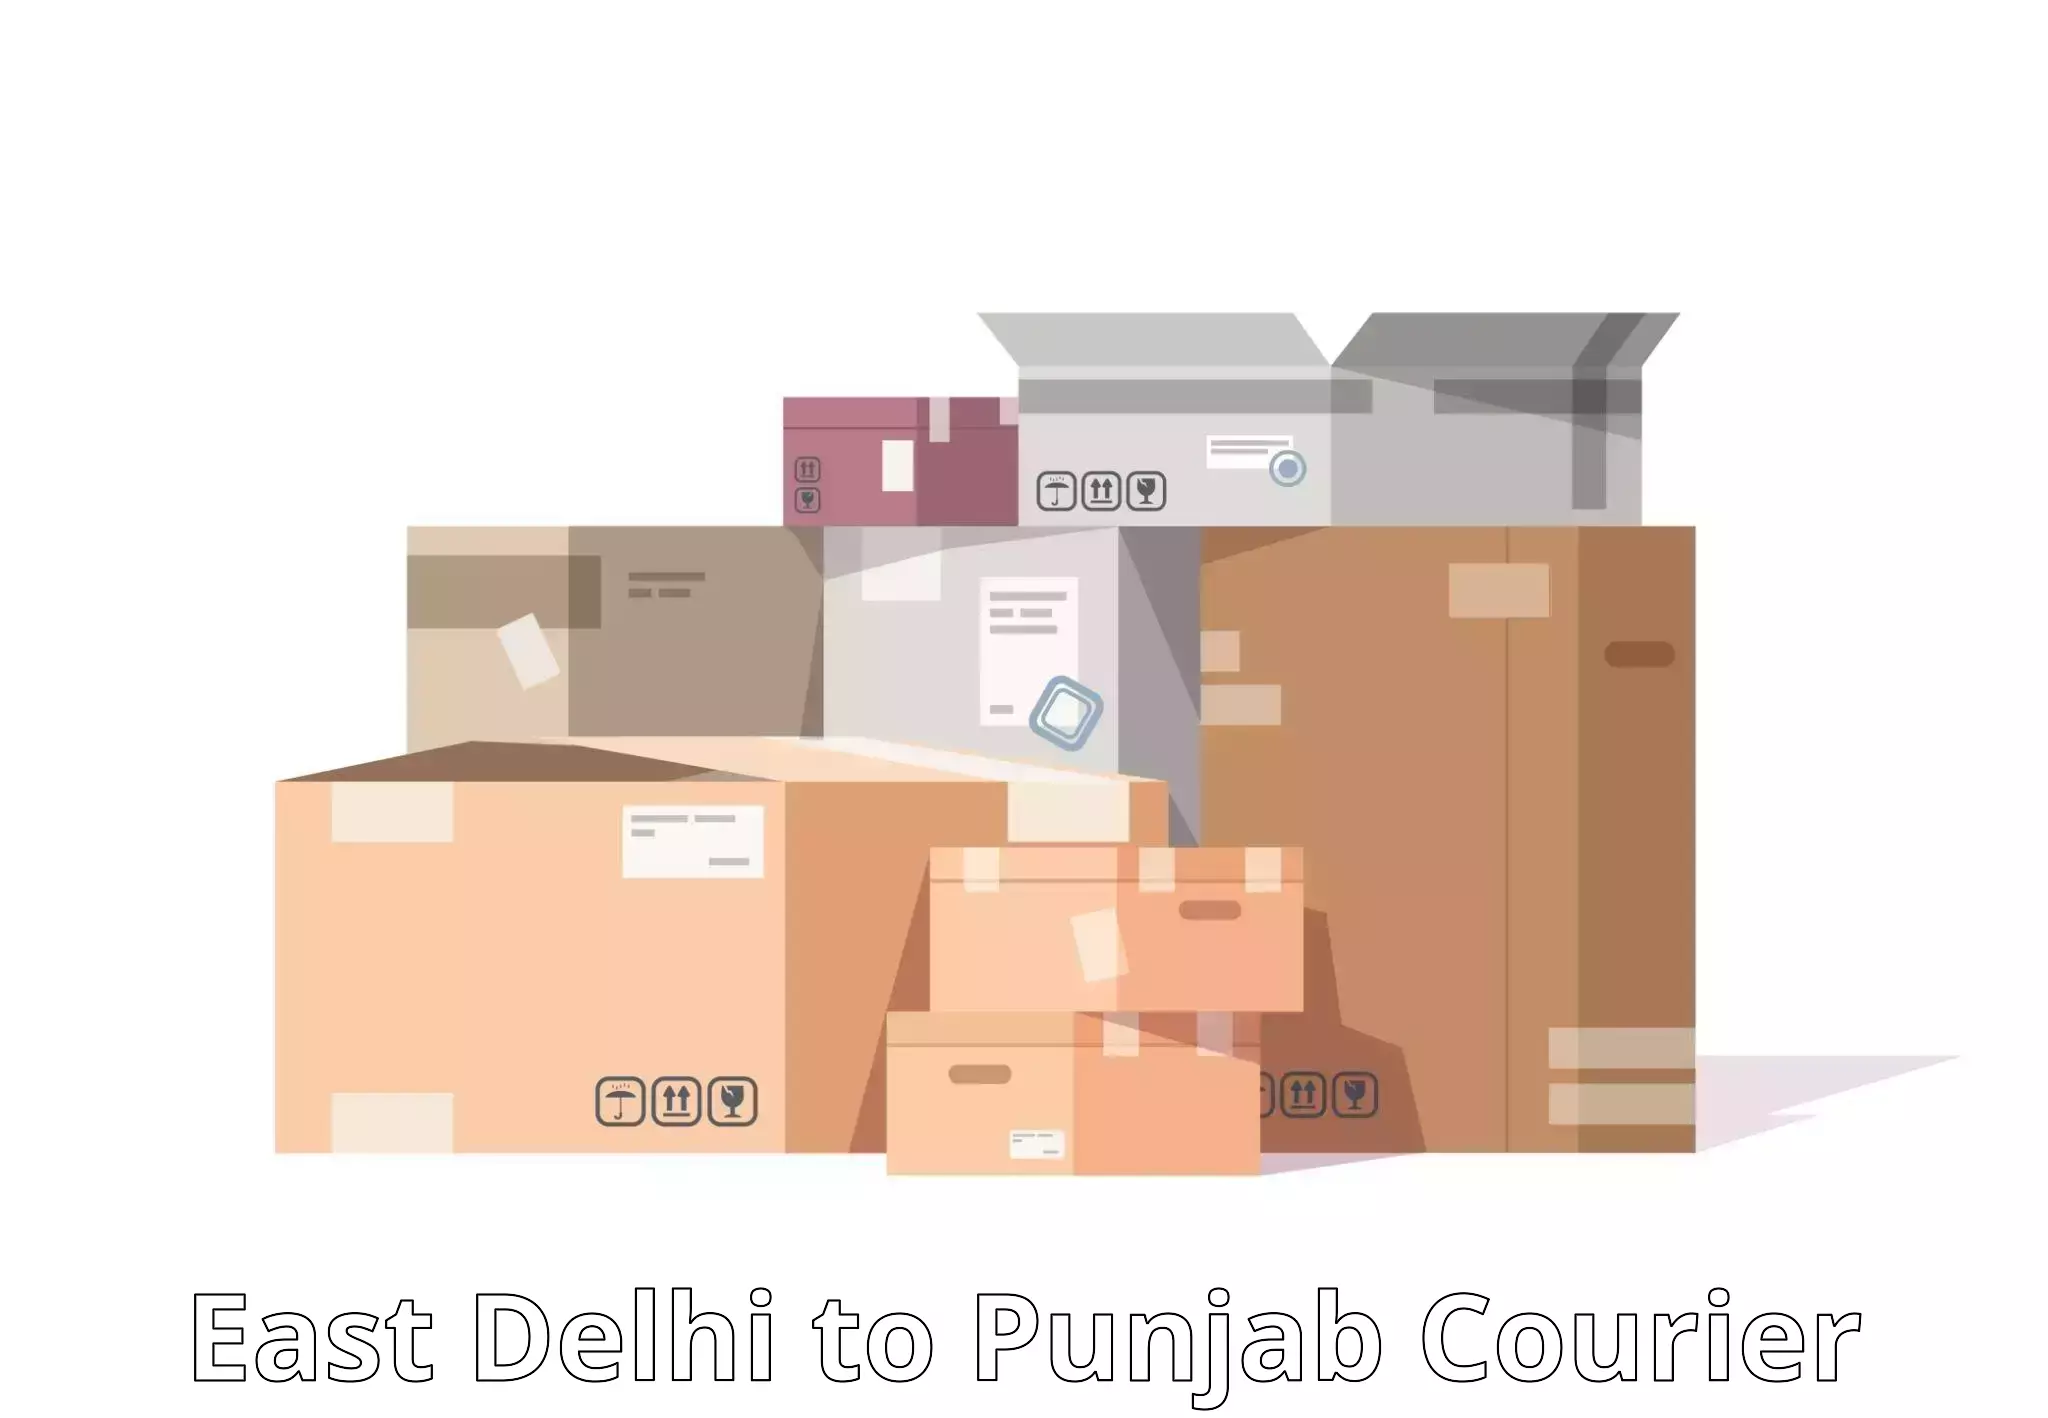 Next day courier East Delhi to Patiala